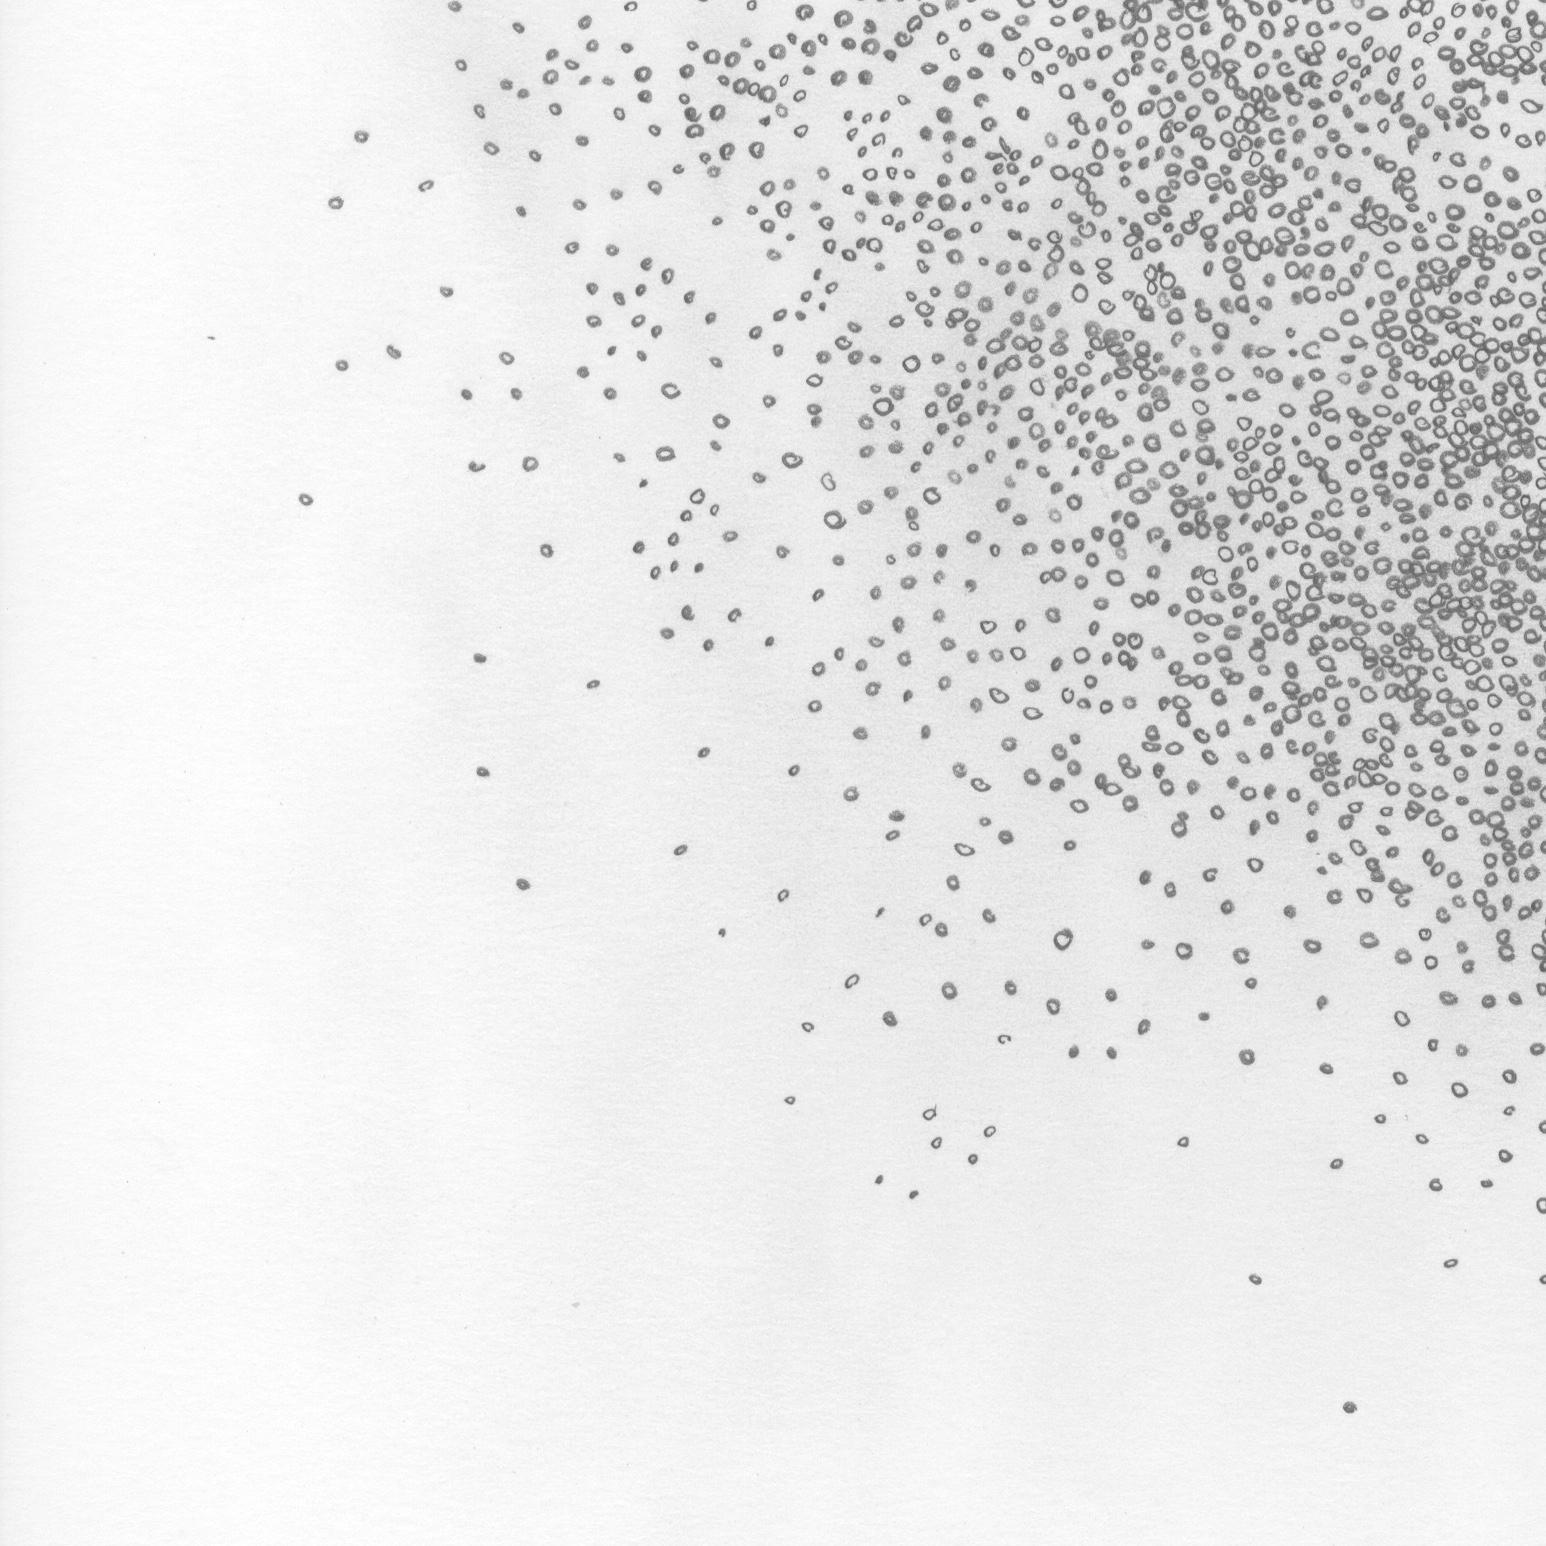 Drawing #146s: by Alan Franklin, British artist and sculptor 1